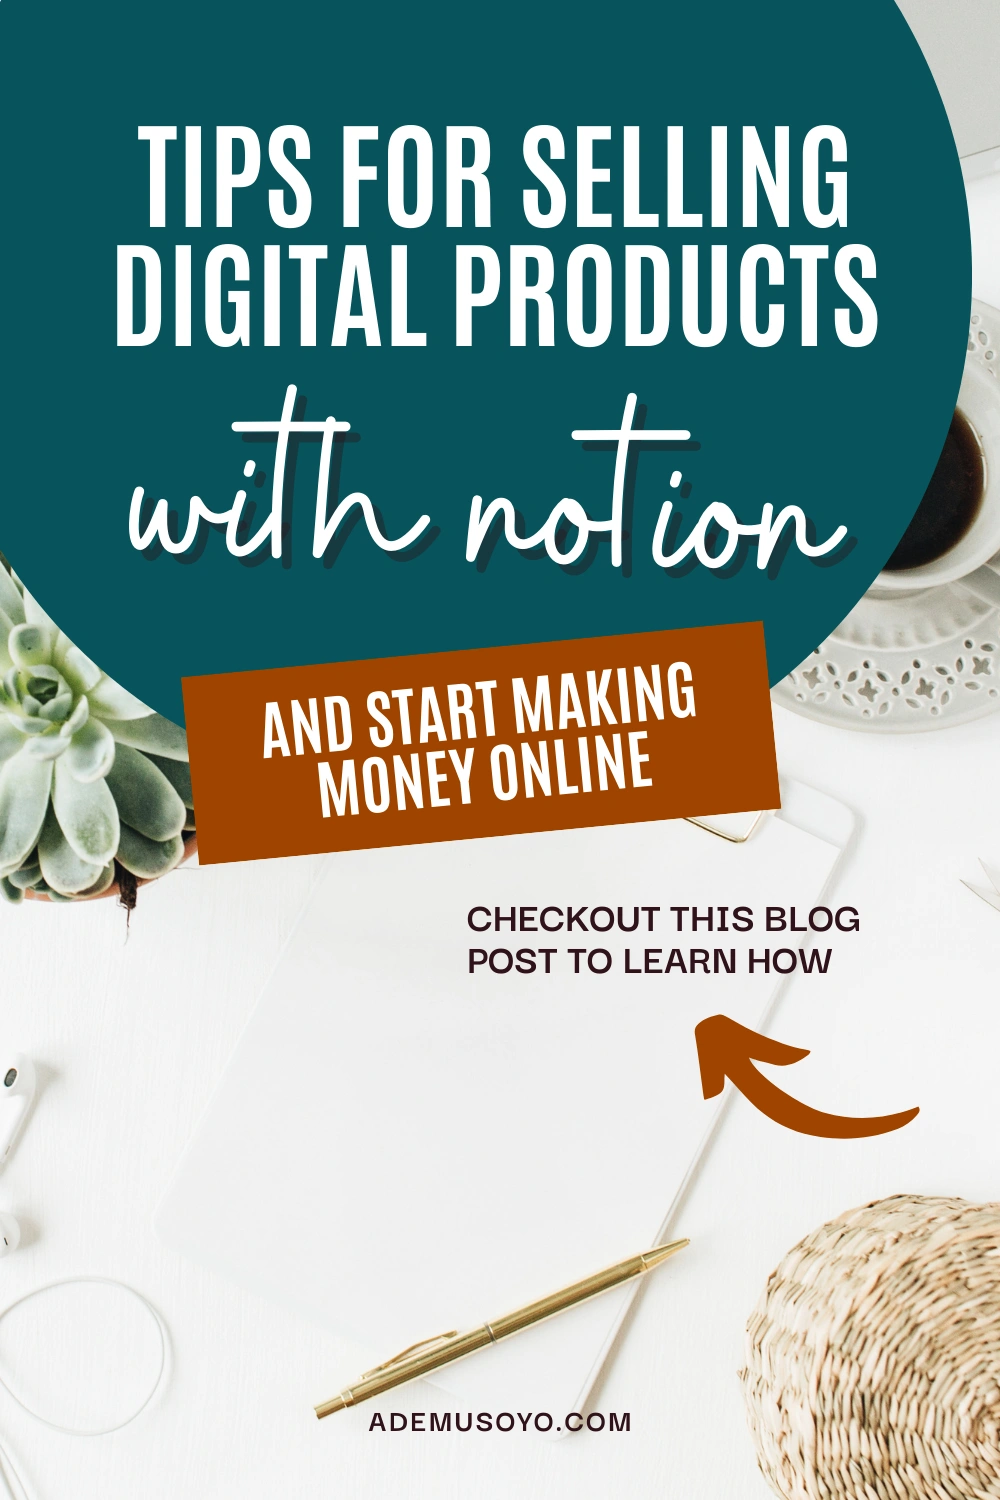 Notion is an online tool for creating beautiful digital products like landing pages, digital planners, content calendars, and more. Read on to learn how to sell digital products with notion and make money online.